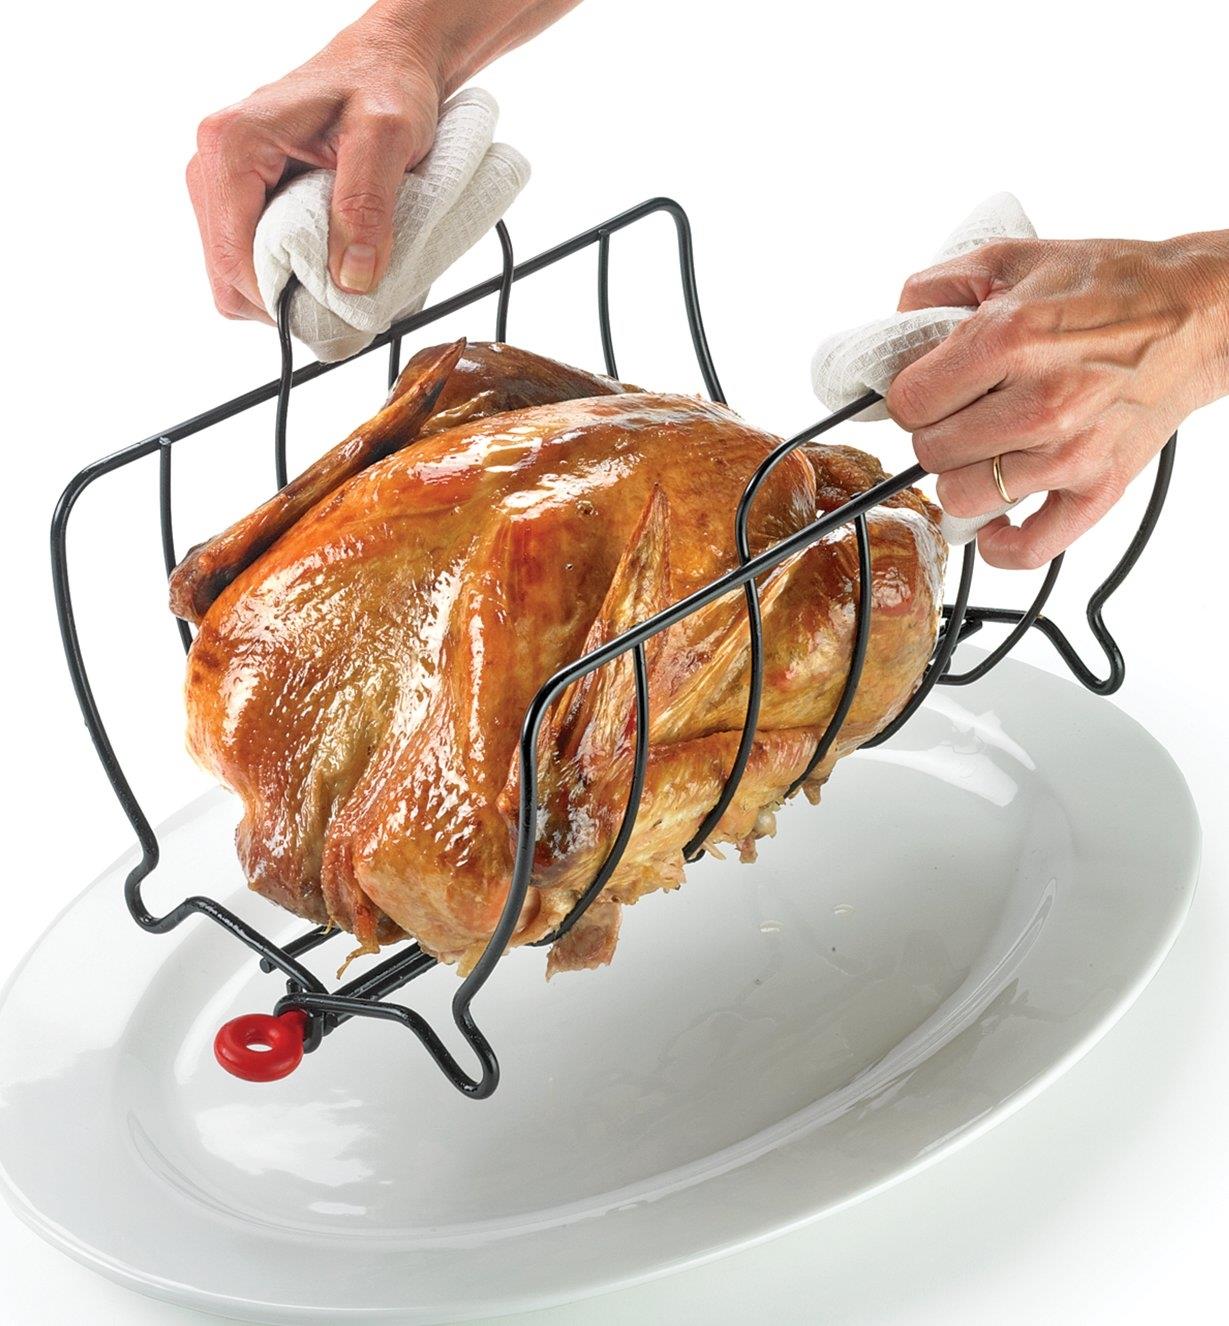 Transferring a roasted chicken to a platter by carrying the rack by its handles